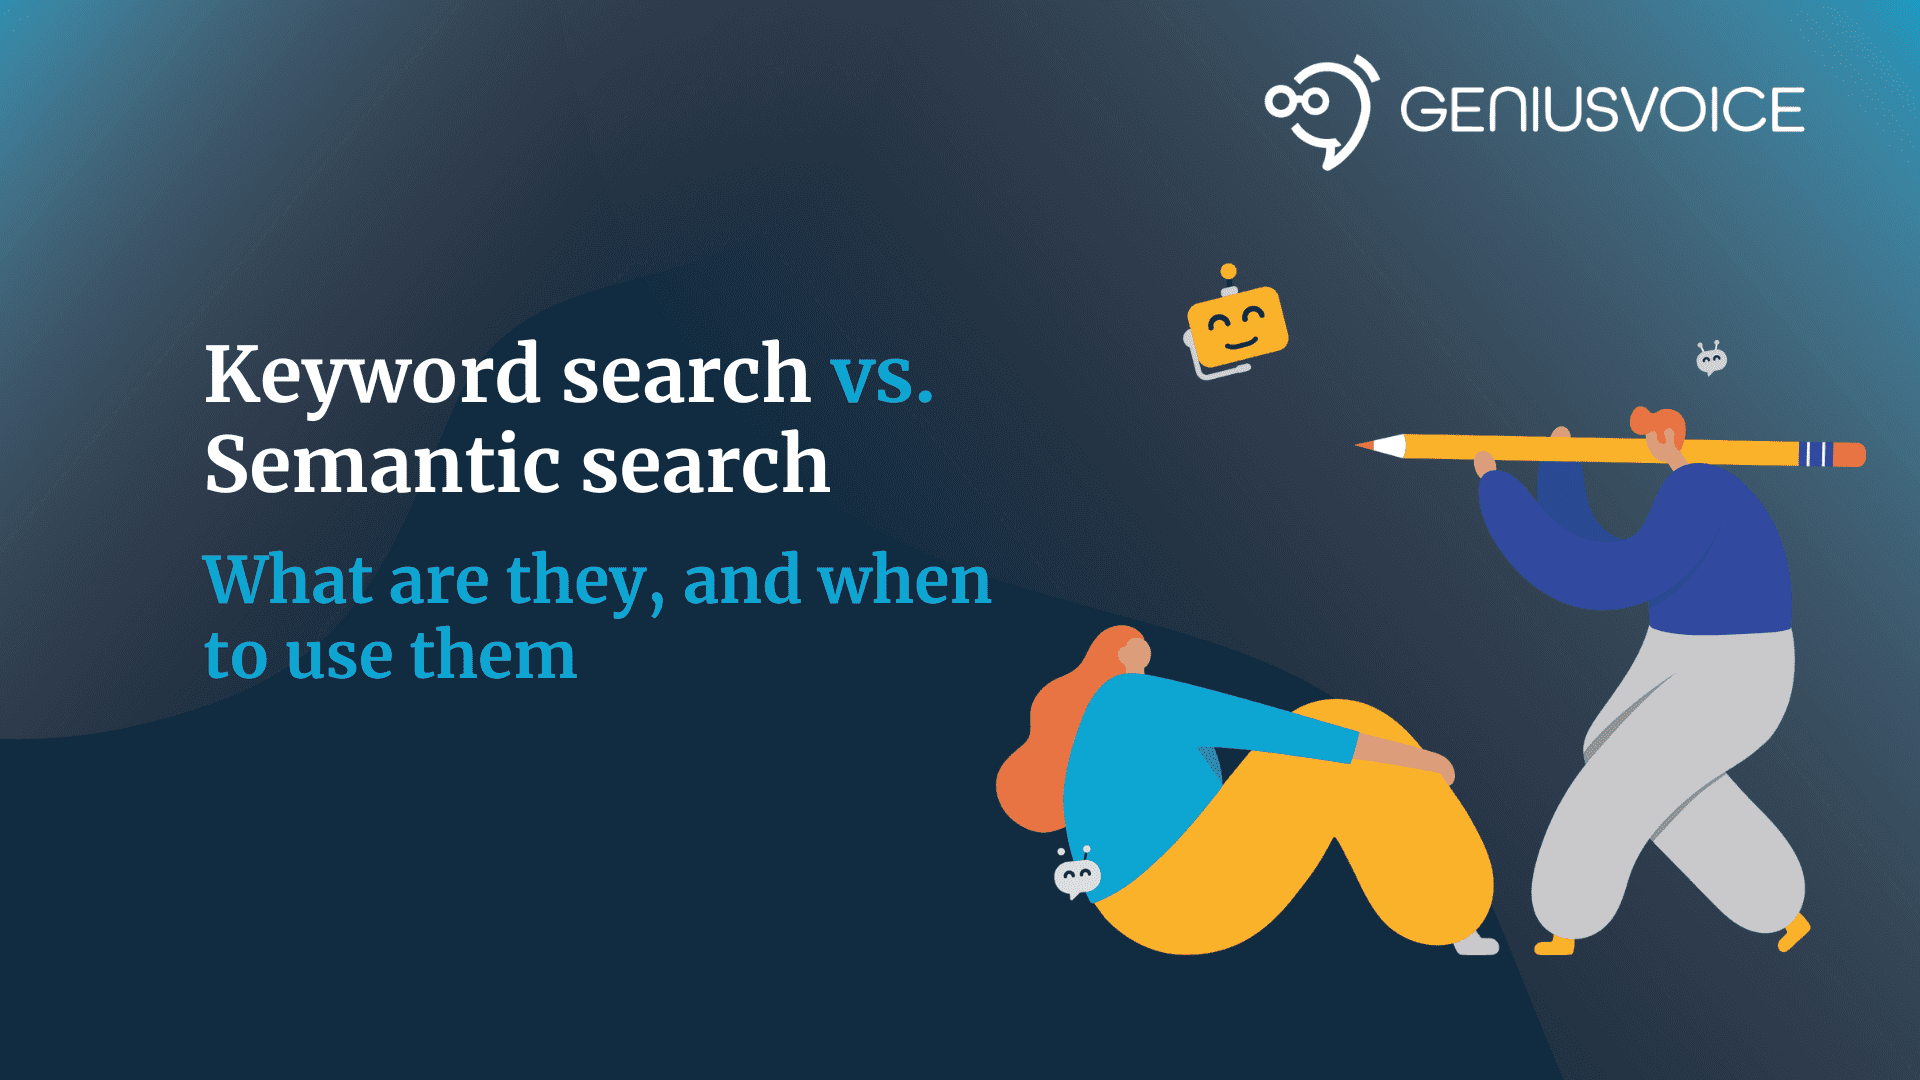 Keyword search vs. semantic search. What are they, and when to use them